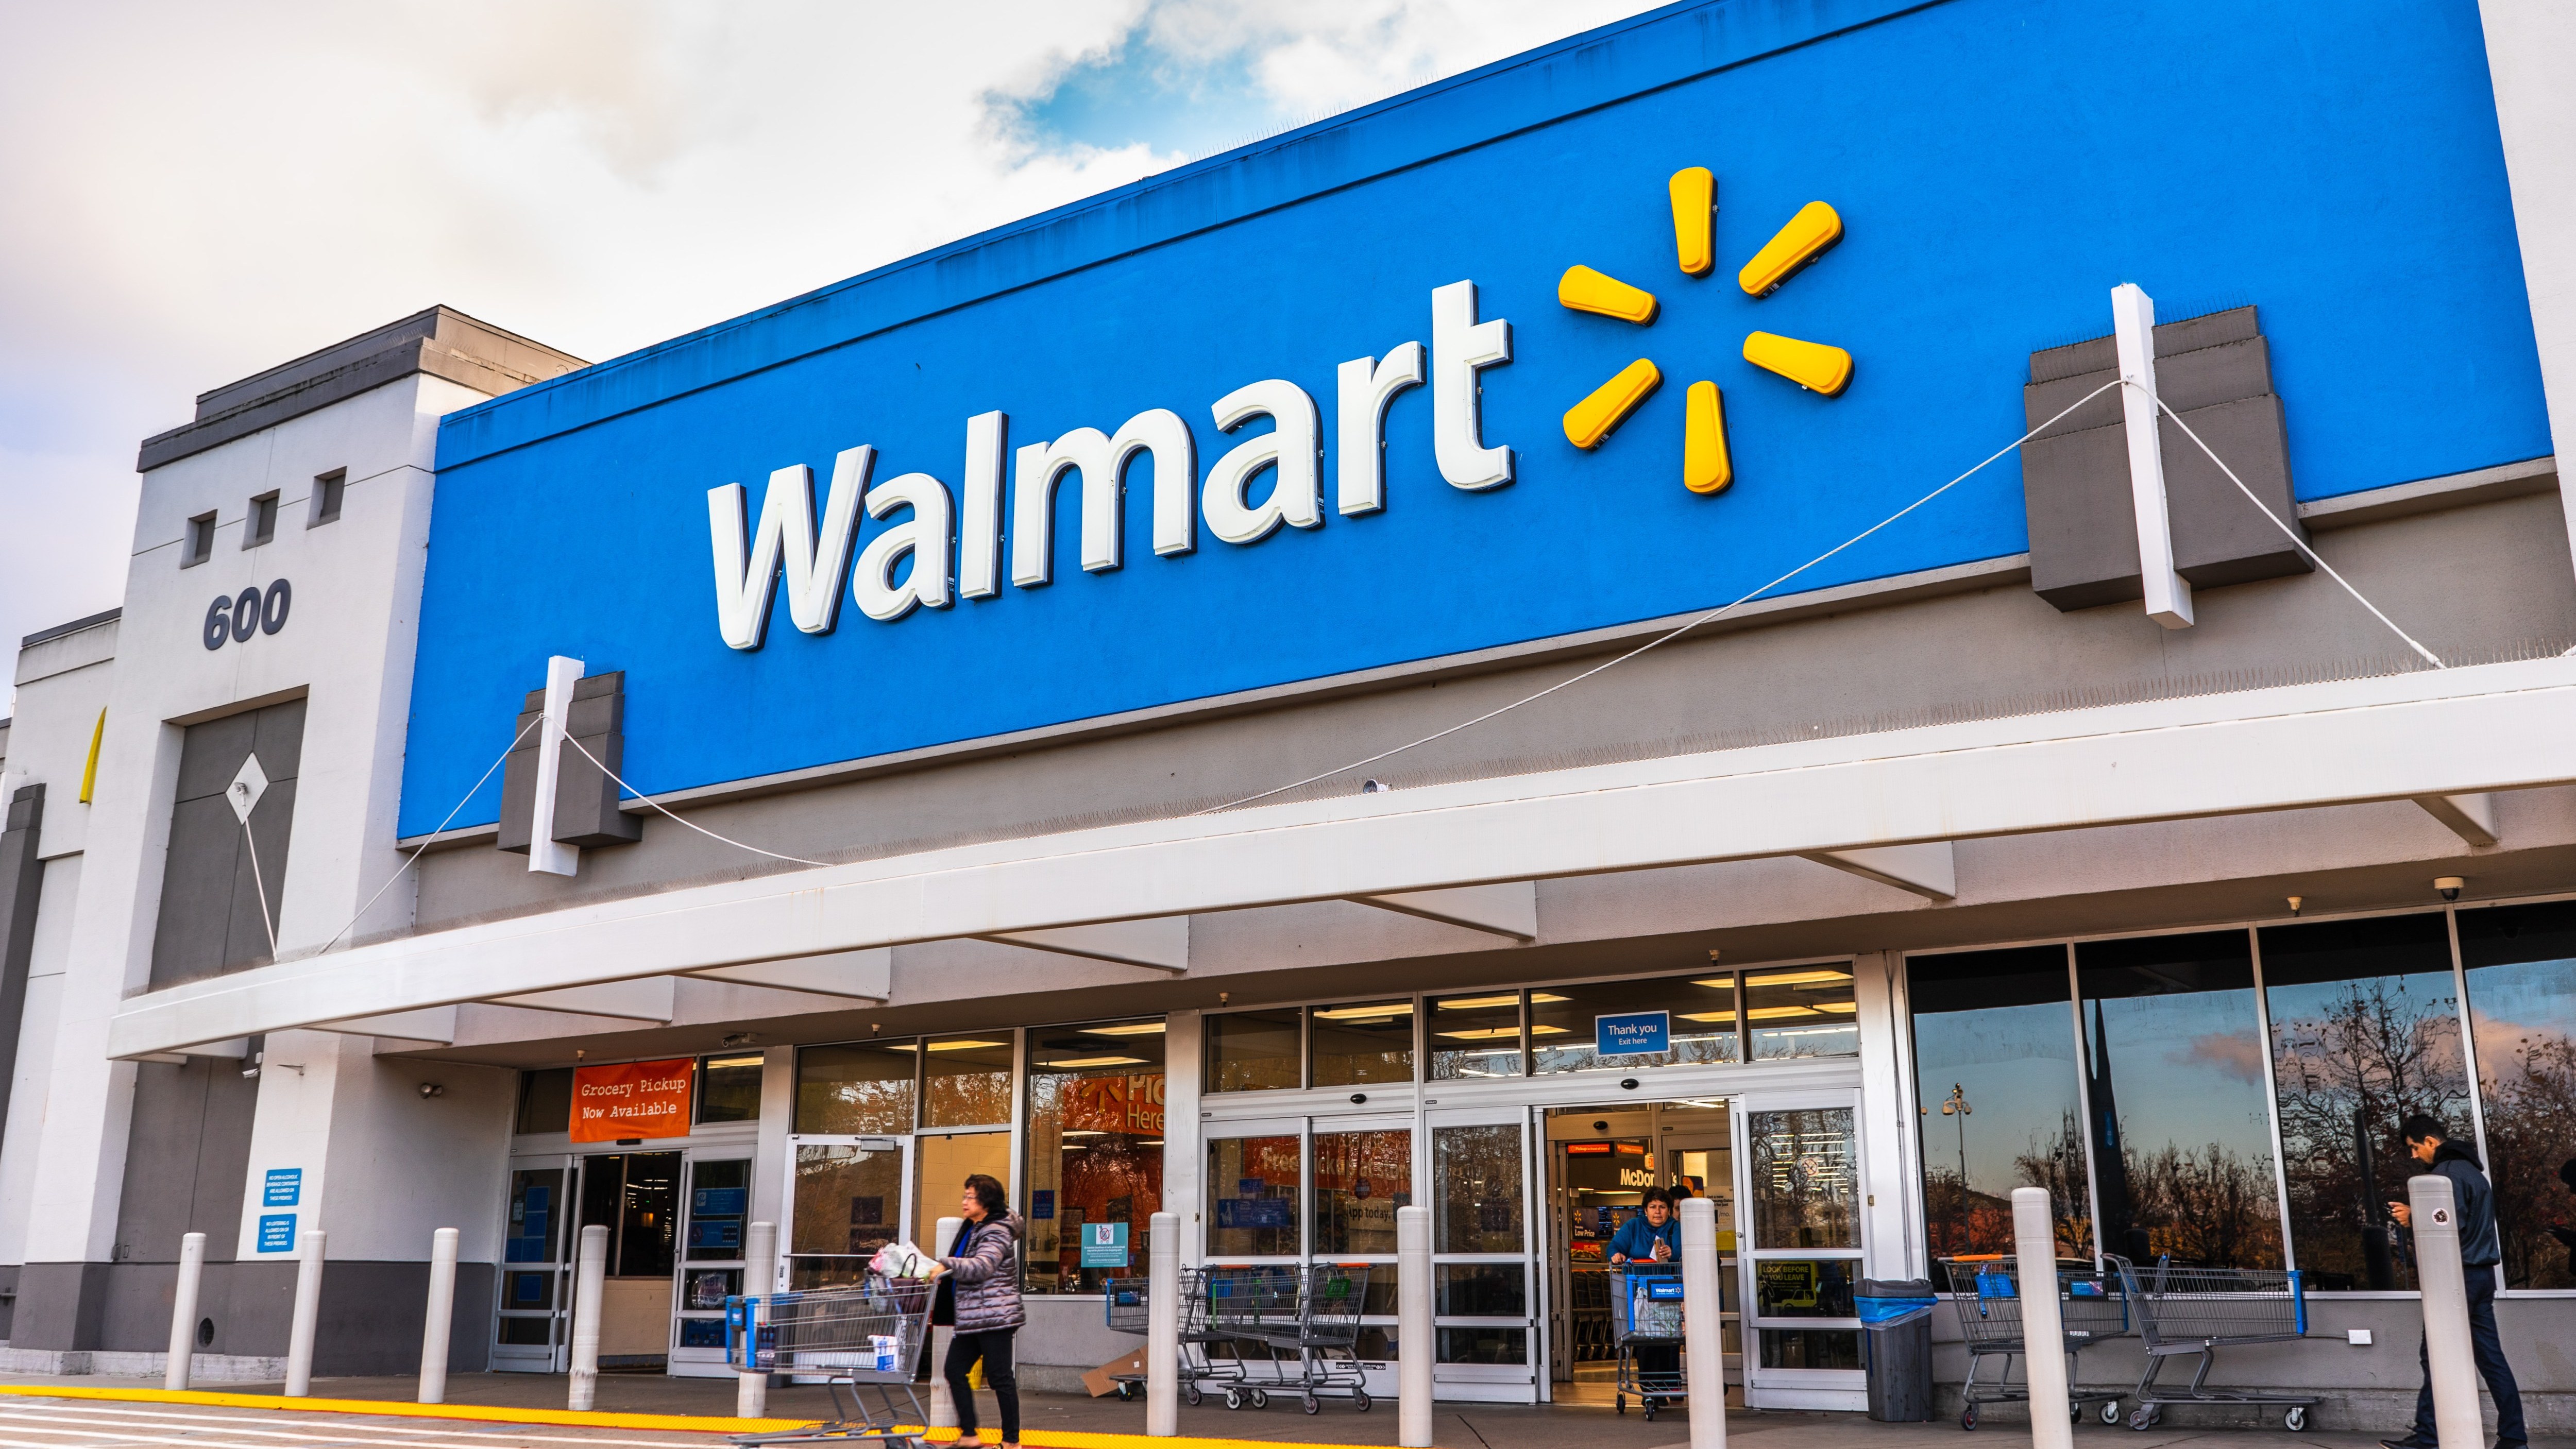 Walmart adds Vizio to its basket to boost advertising